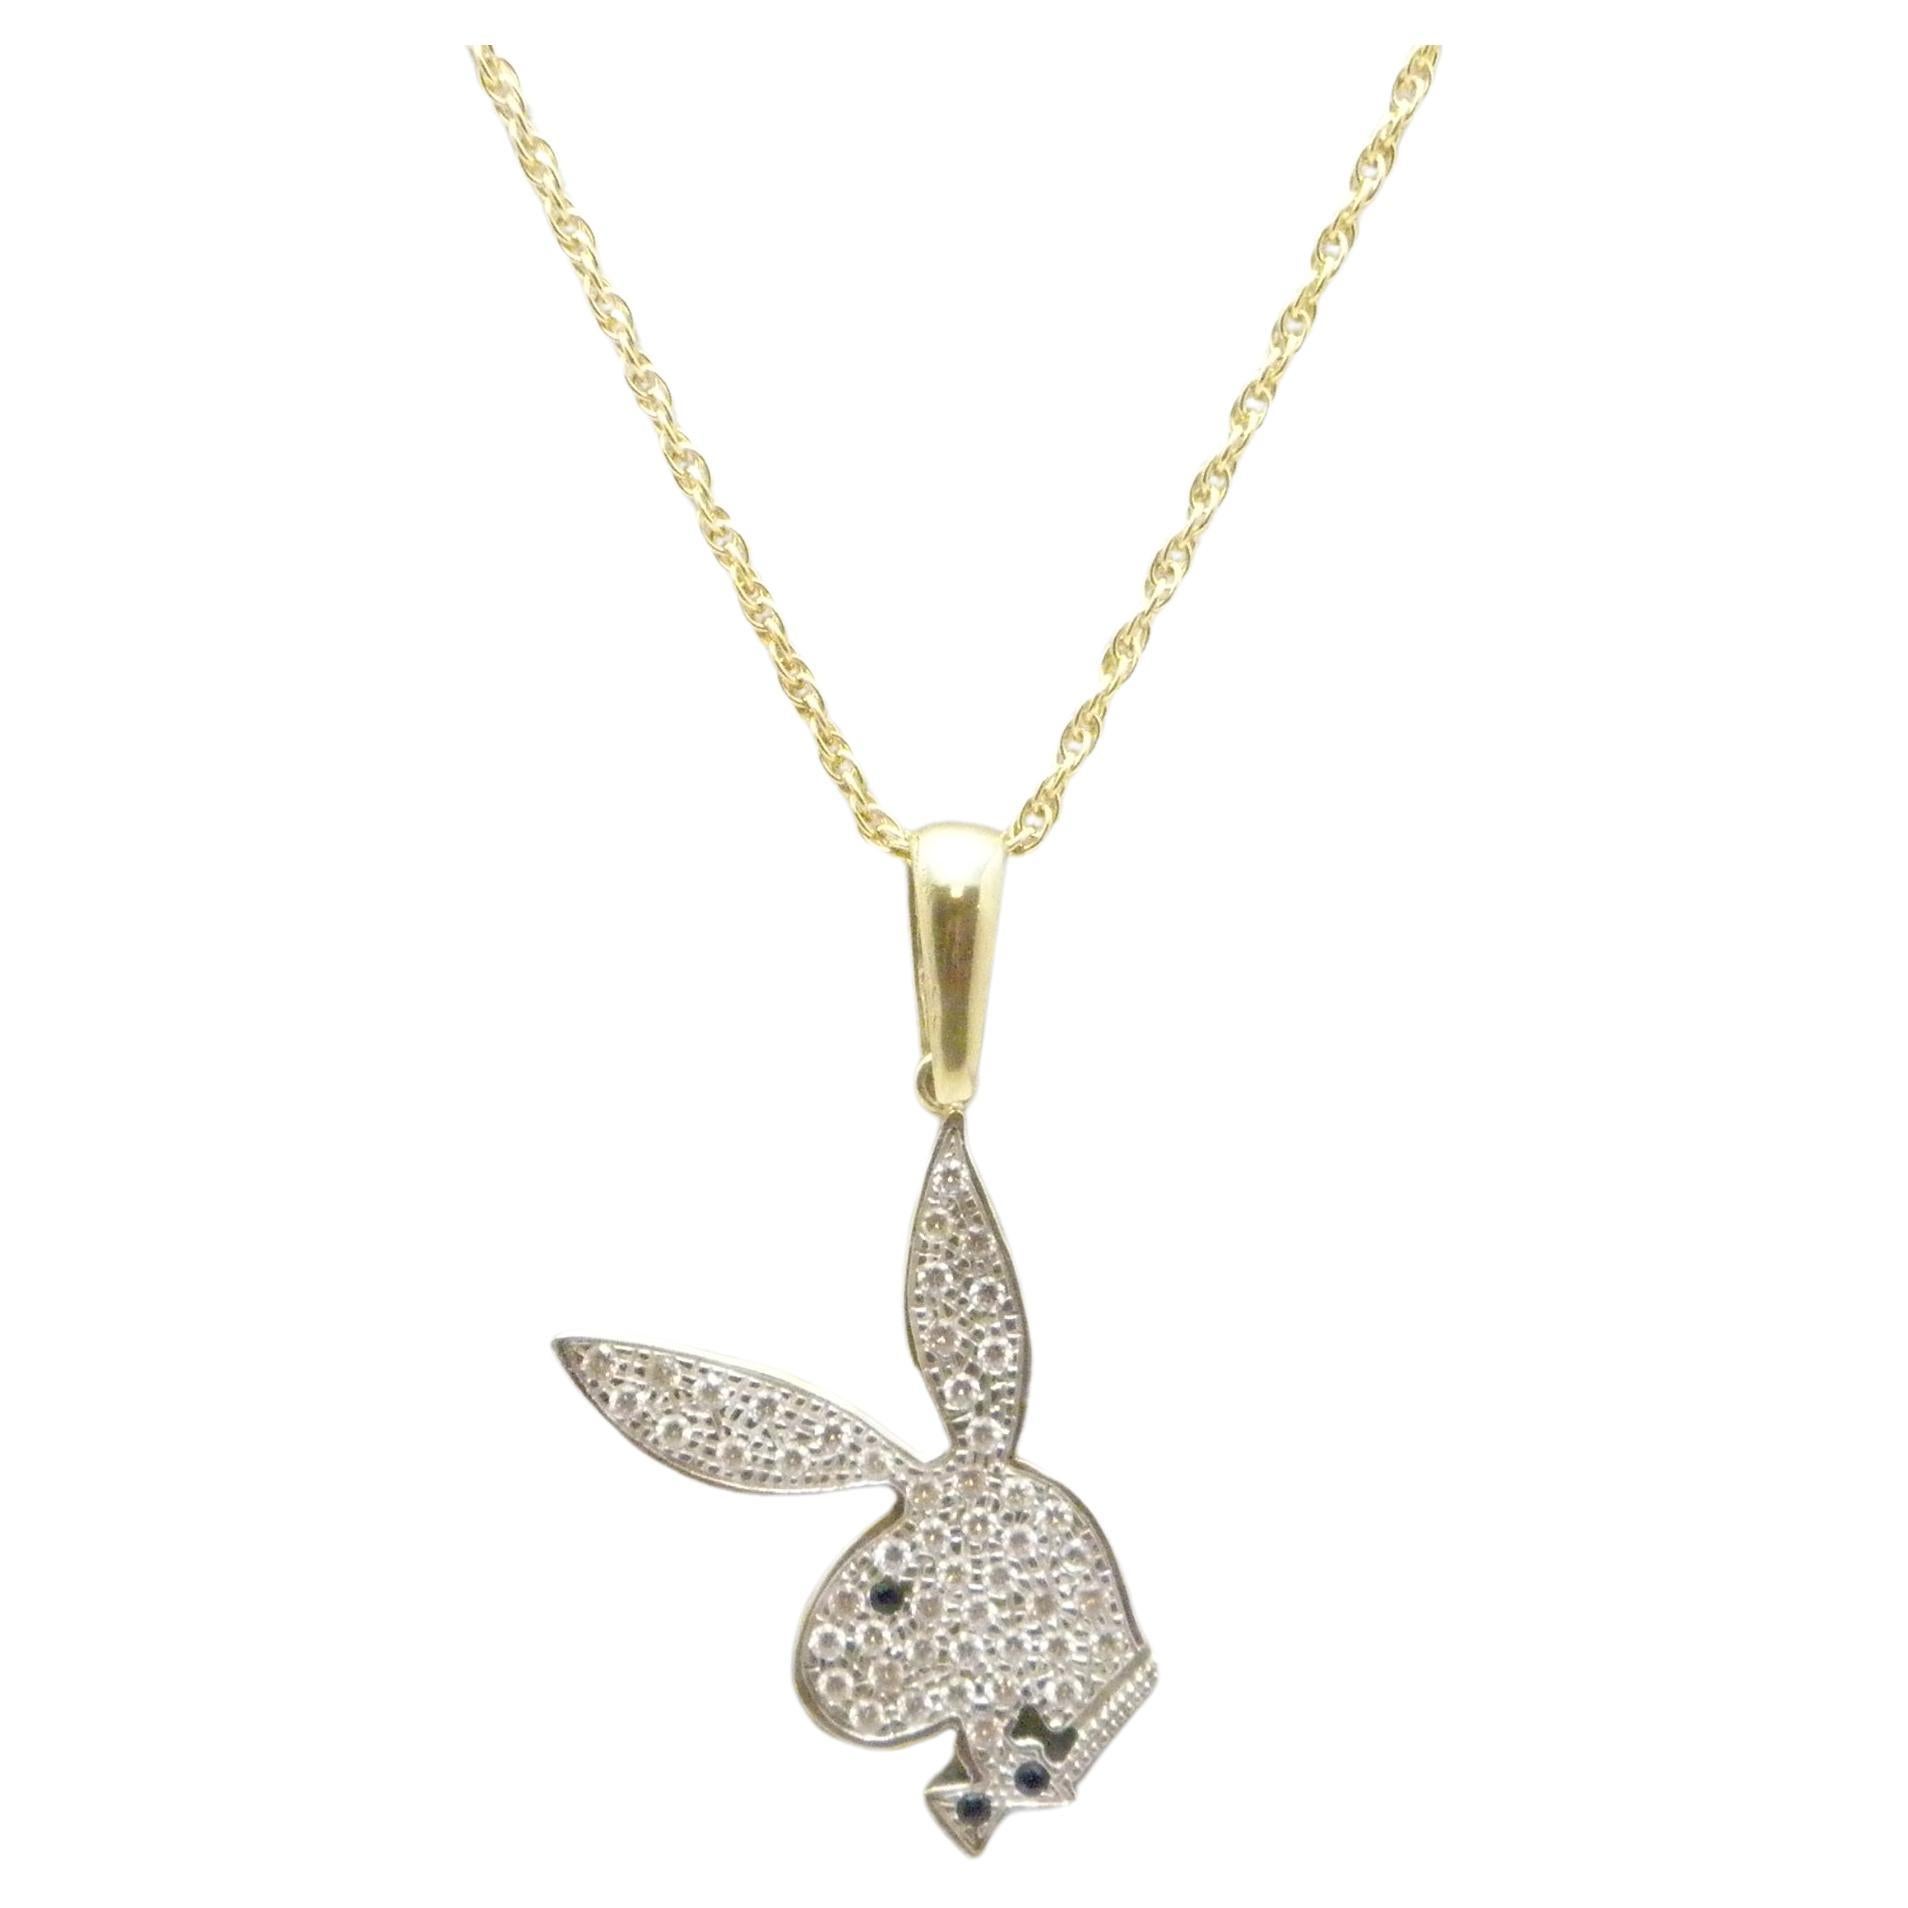 Vintage 9ct Gold Enormous Playboy Bunny Pendant Necklace Rope Chain 375 20 Inch For Sale